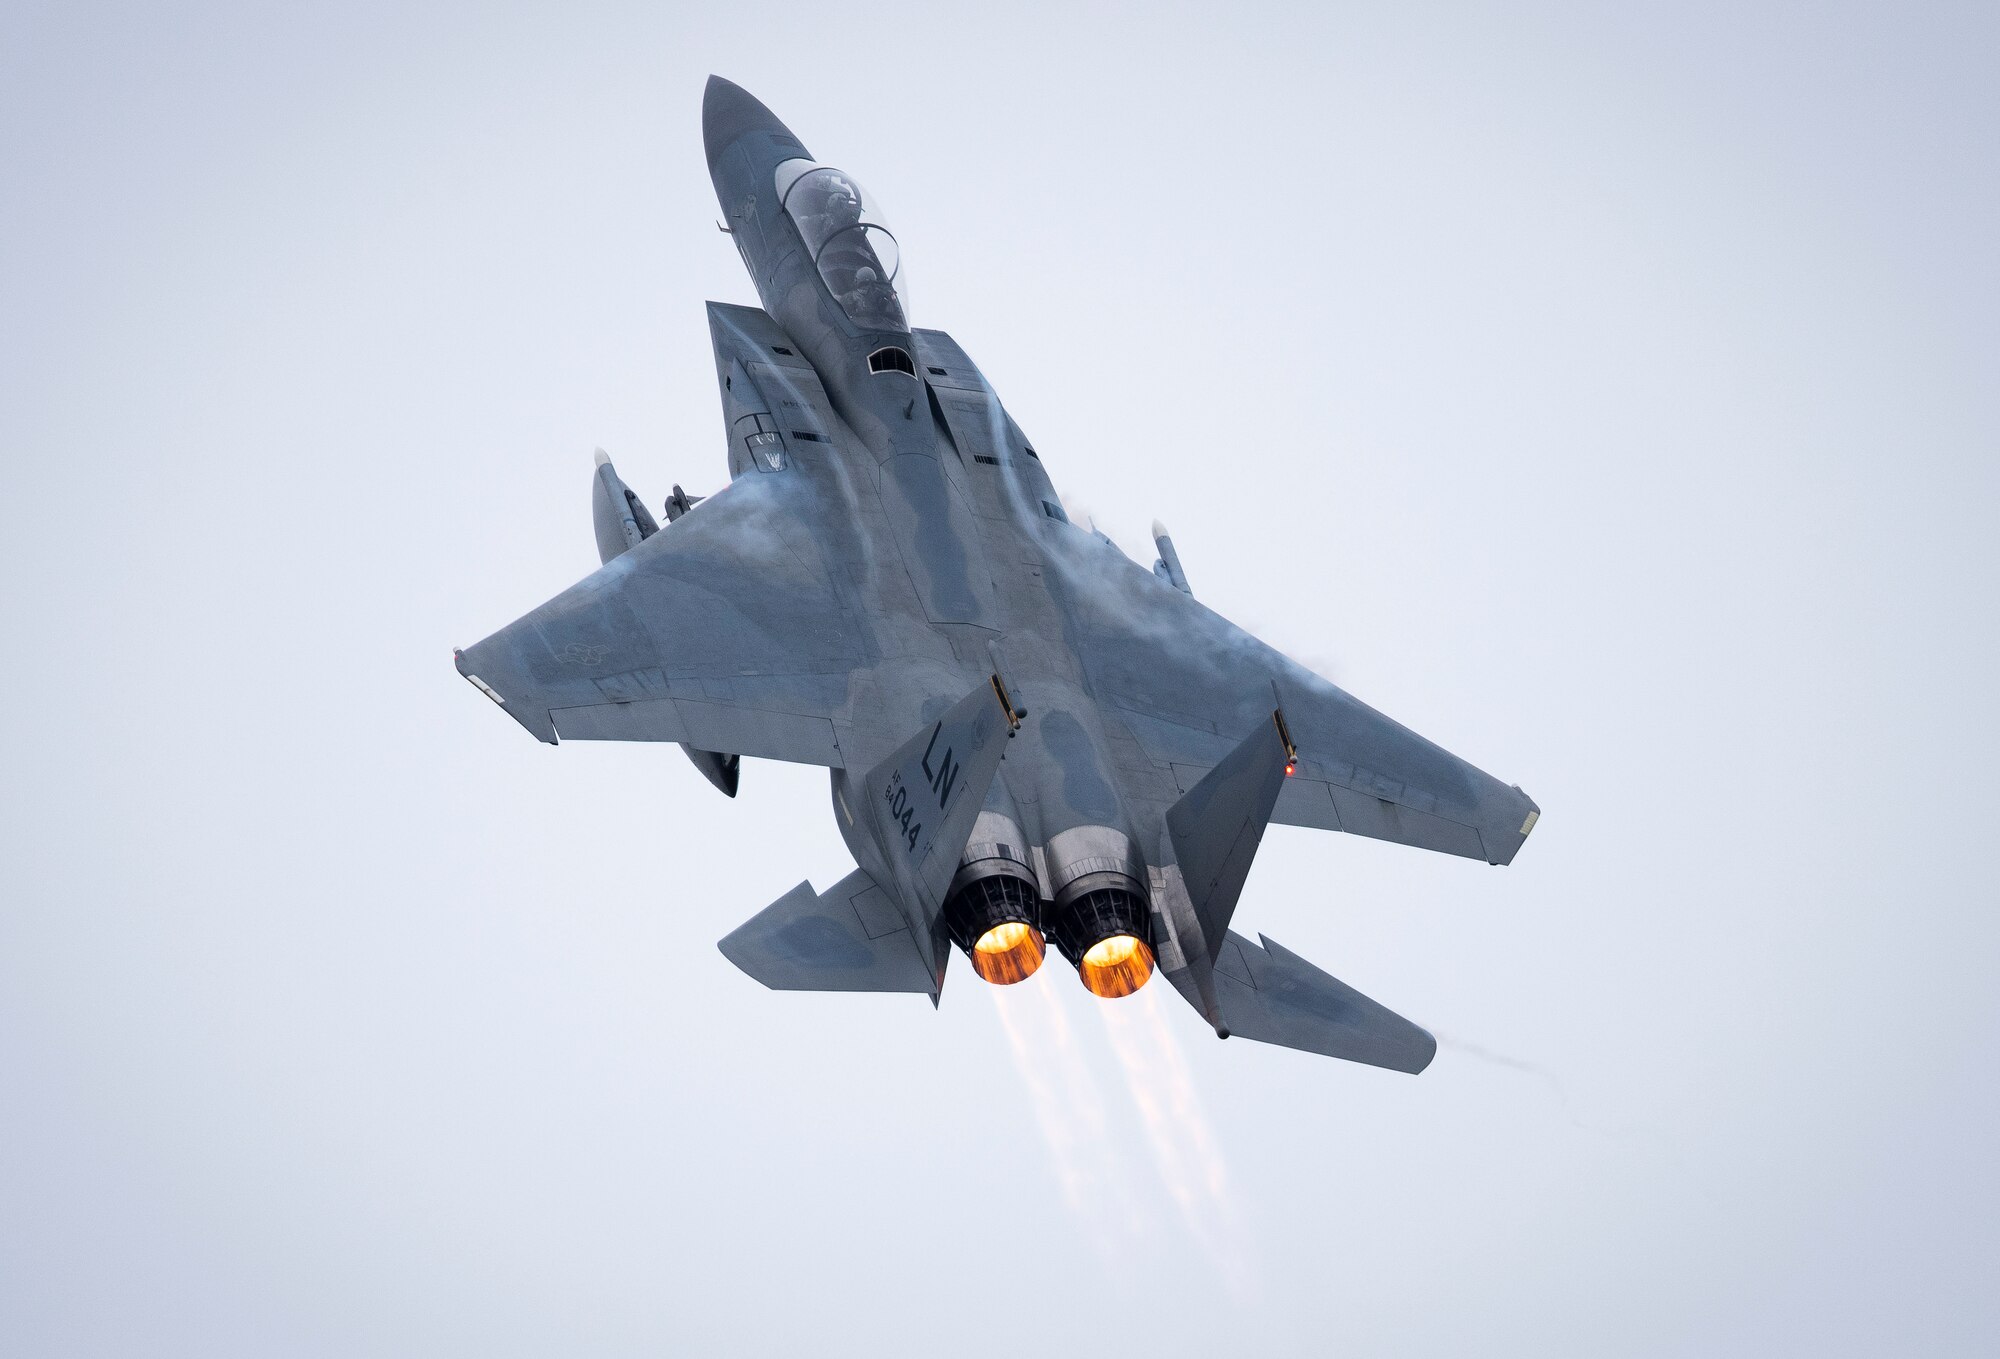 An F-15D Eagle assigned to the 493rd Fighter Squadron takes off from Royal Air Force Lakenheath, England, Feb. 28, 2020. The Eagle provides the Liberty Wing with all-weather, day or night air superiority and air-to-ground precision combat capabilities. (U.S. Air Force photo by Airman 1st Class Madeline Herzog)